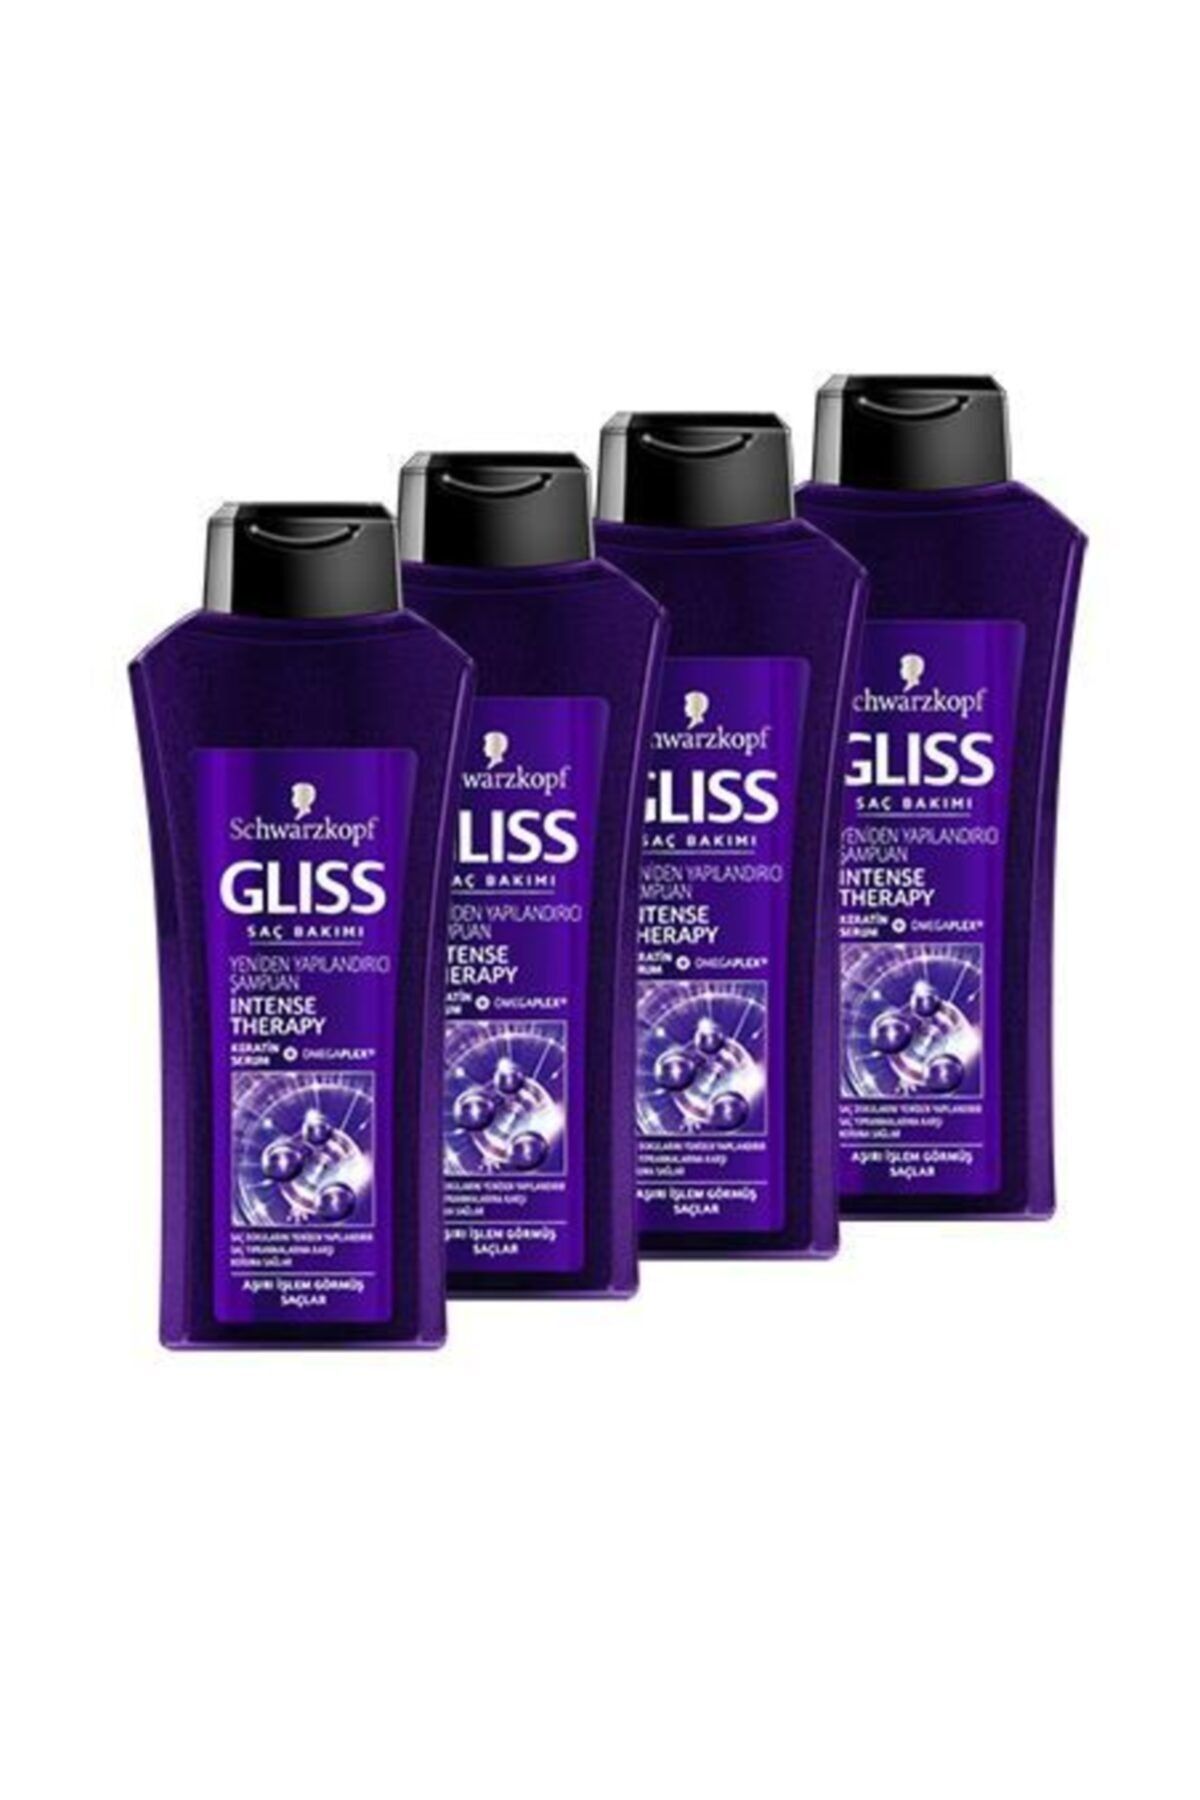 Gliss Intense Therapy Şampuan 525 x 4